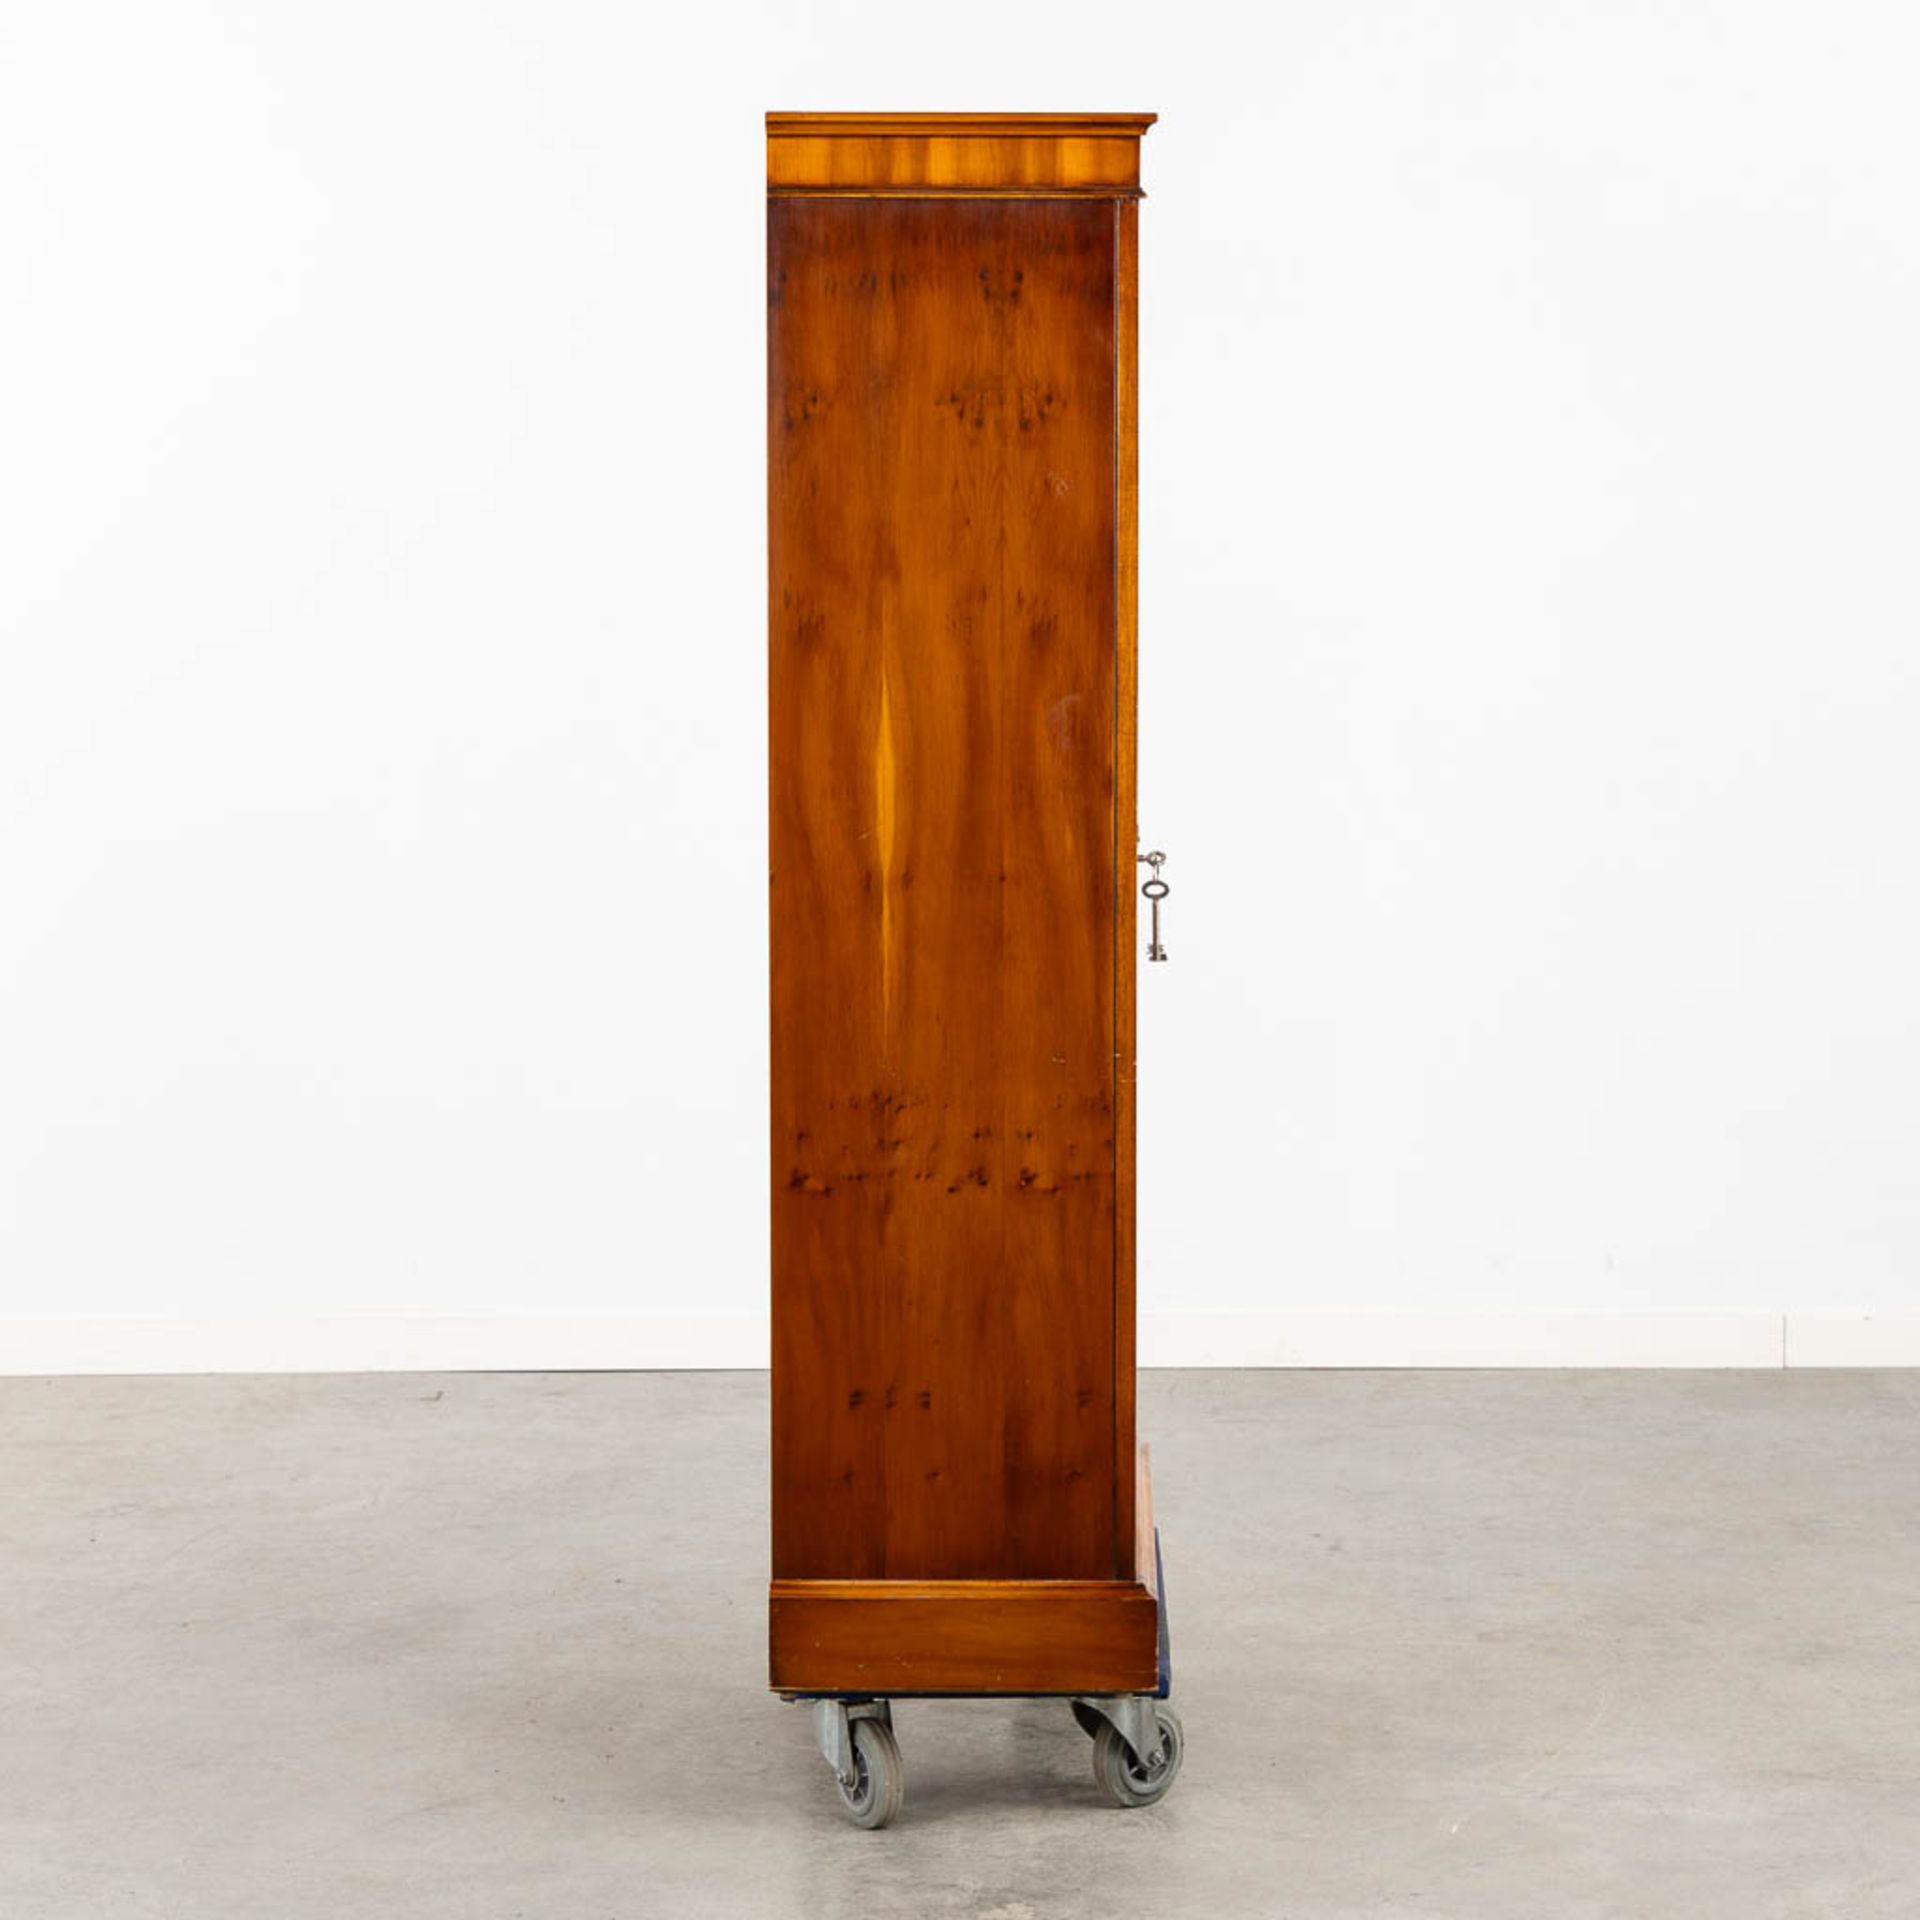 An armory cabinet/safe, metal mounted with wood. Circa 1980. (L:34 x W:60 x H:139 cm) - Image 7 of 13